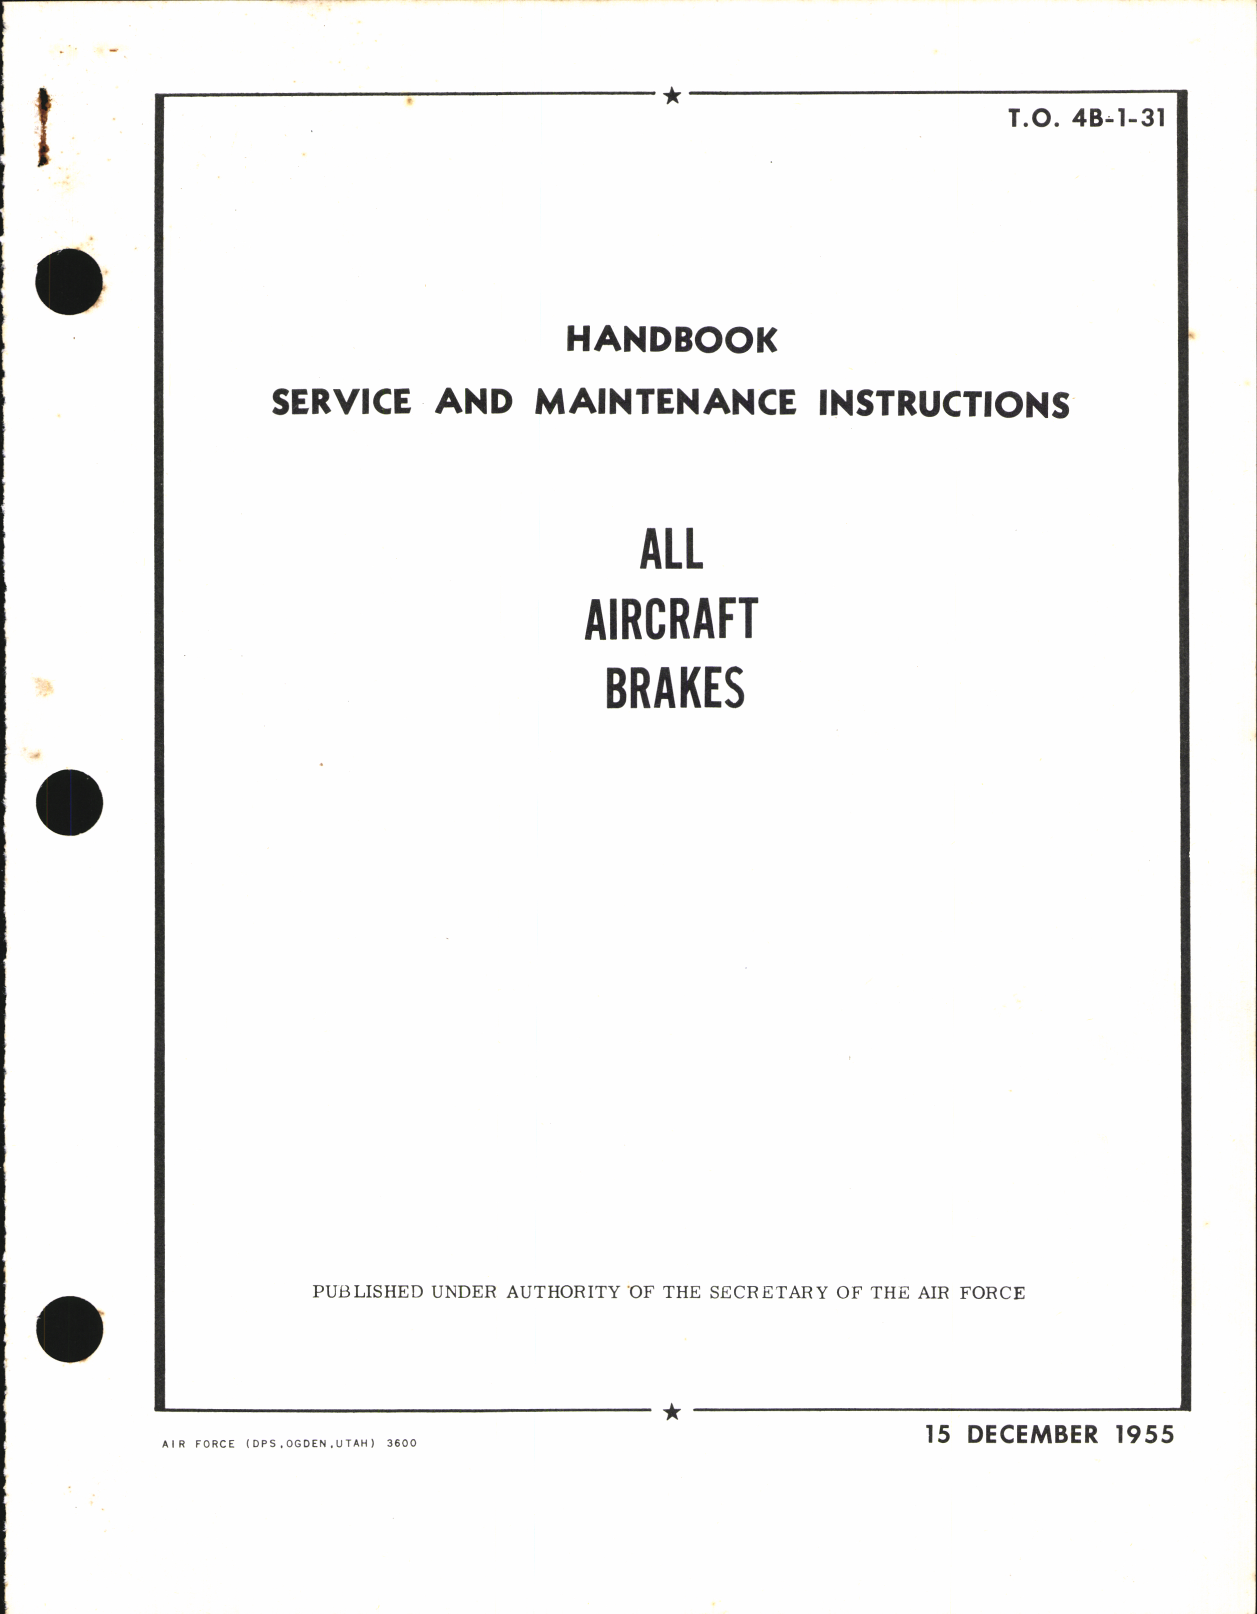 Sample page 1 from AirCorps Library document: Service and Maintenance Instructions for All Aircraft Brakes